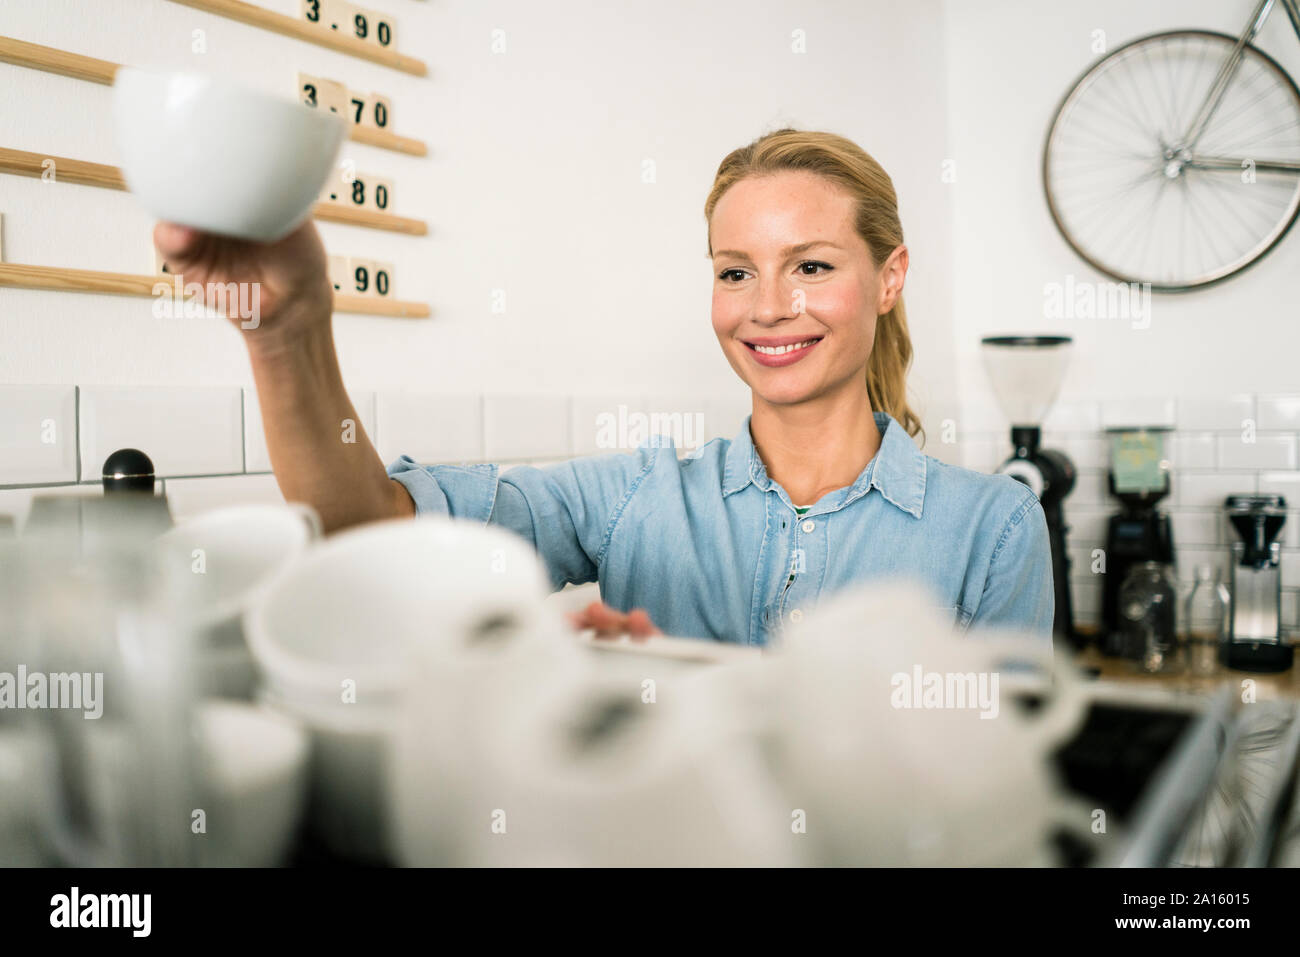 Blond woman working at the counter of a coffee shop Stock Photo